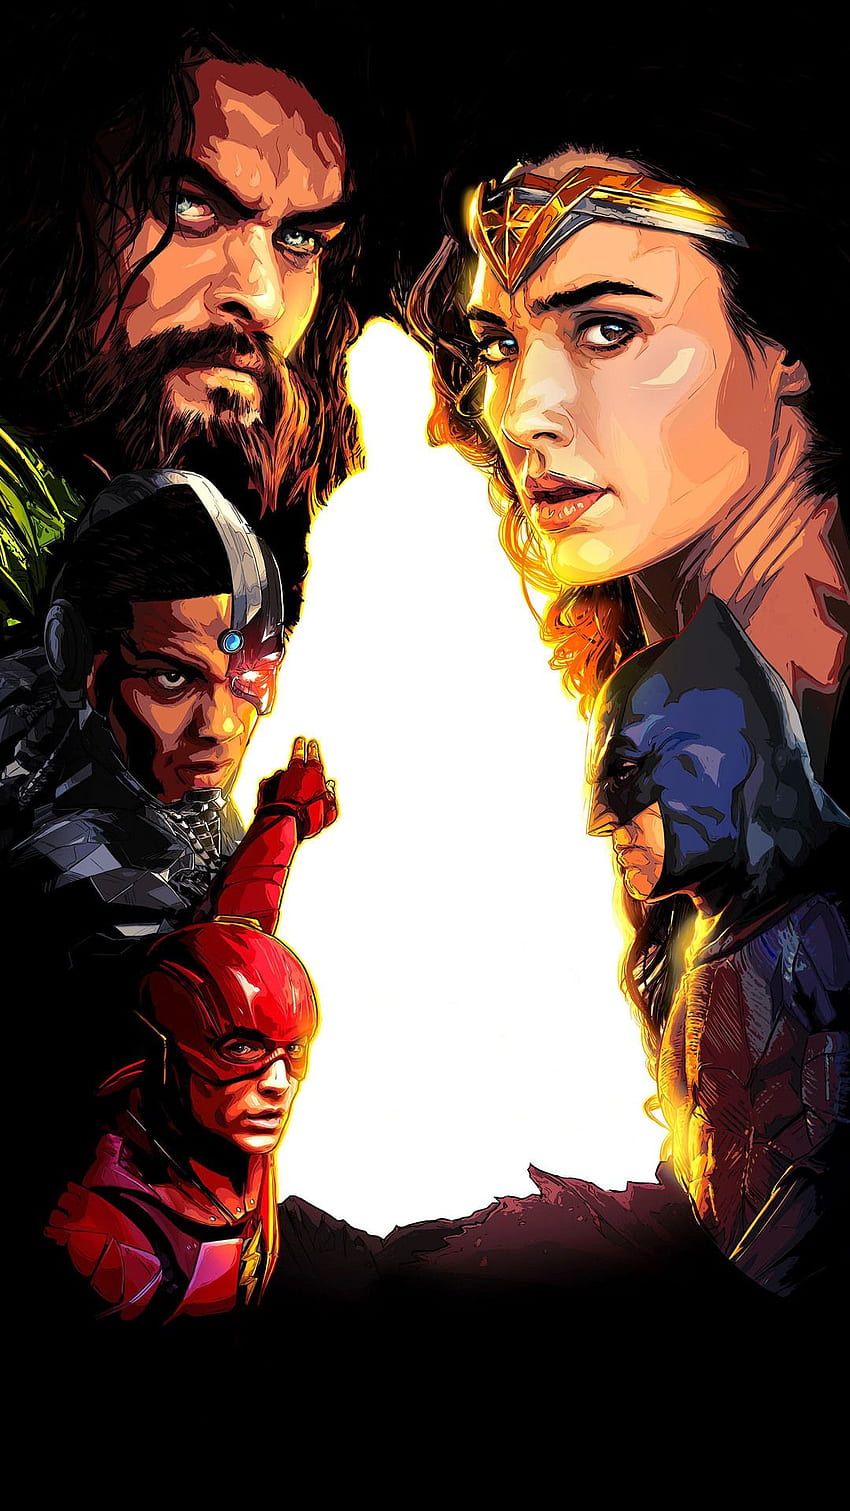 Justice League 2017 New Poster iPhone 7, 6s, 6 Plus, Pixel HD phone wallpaper